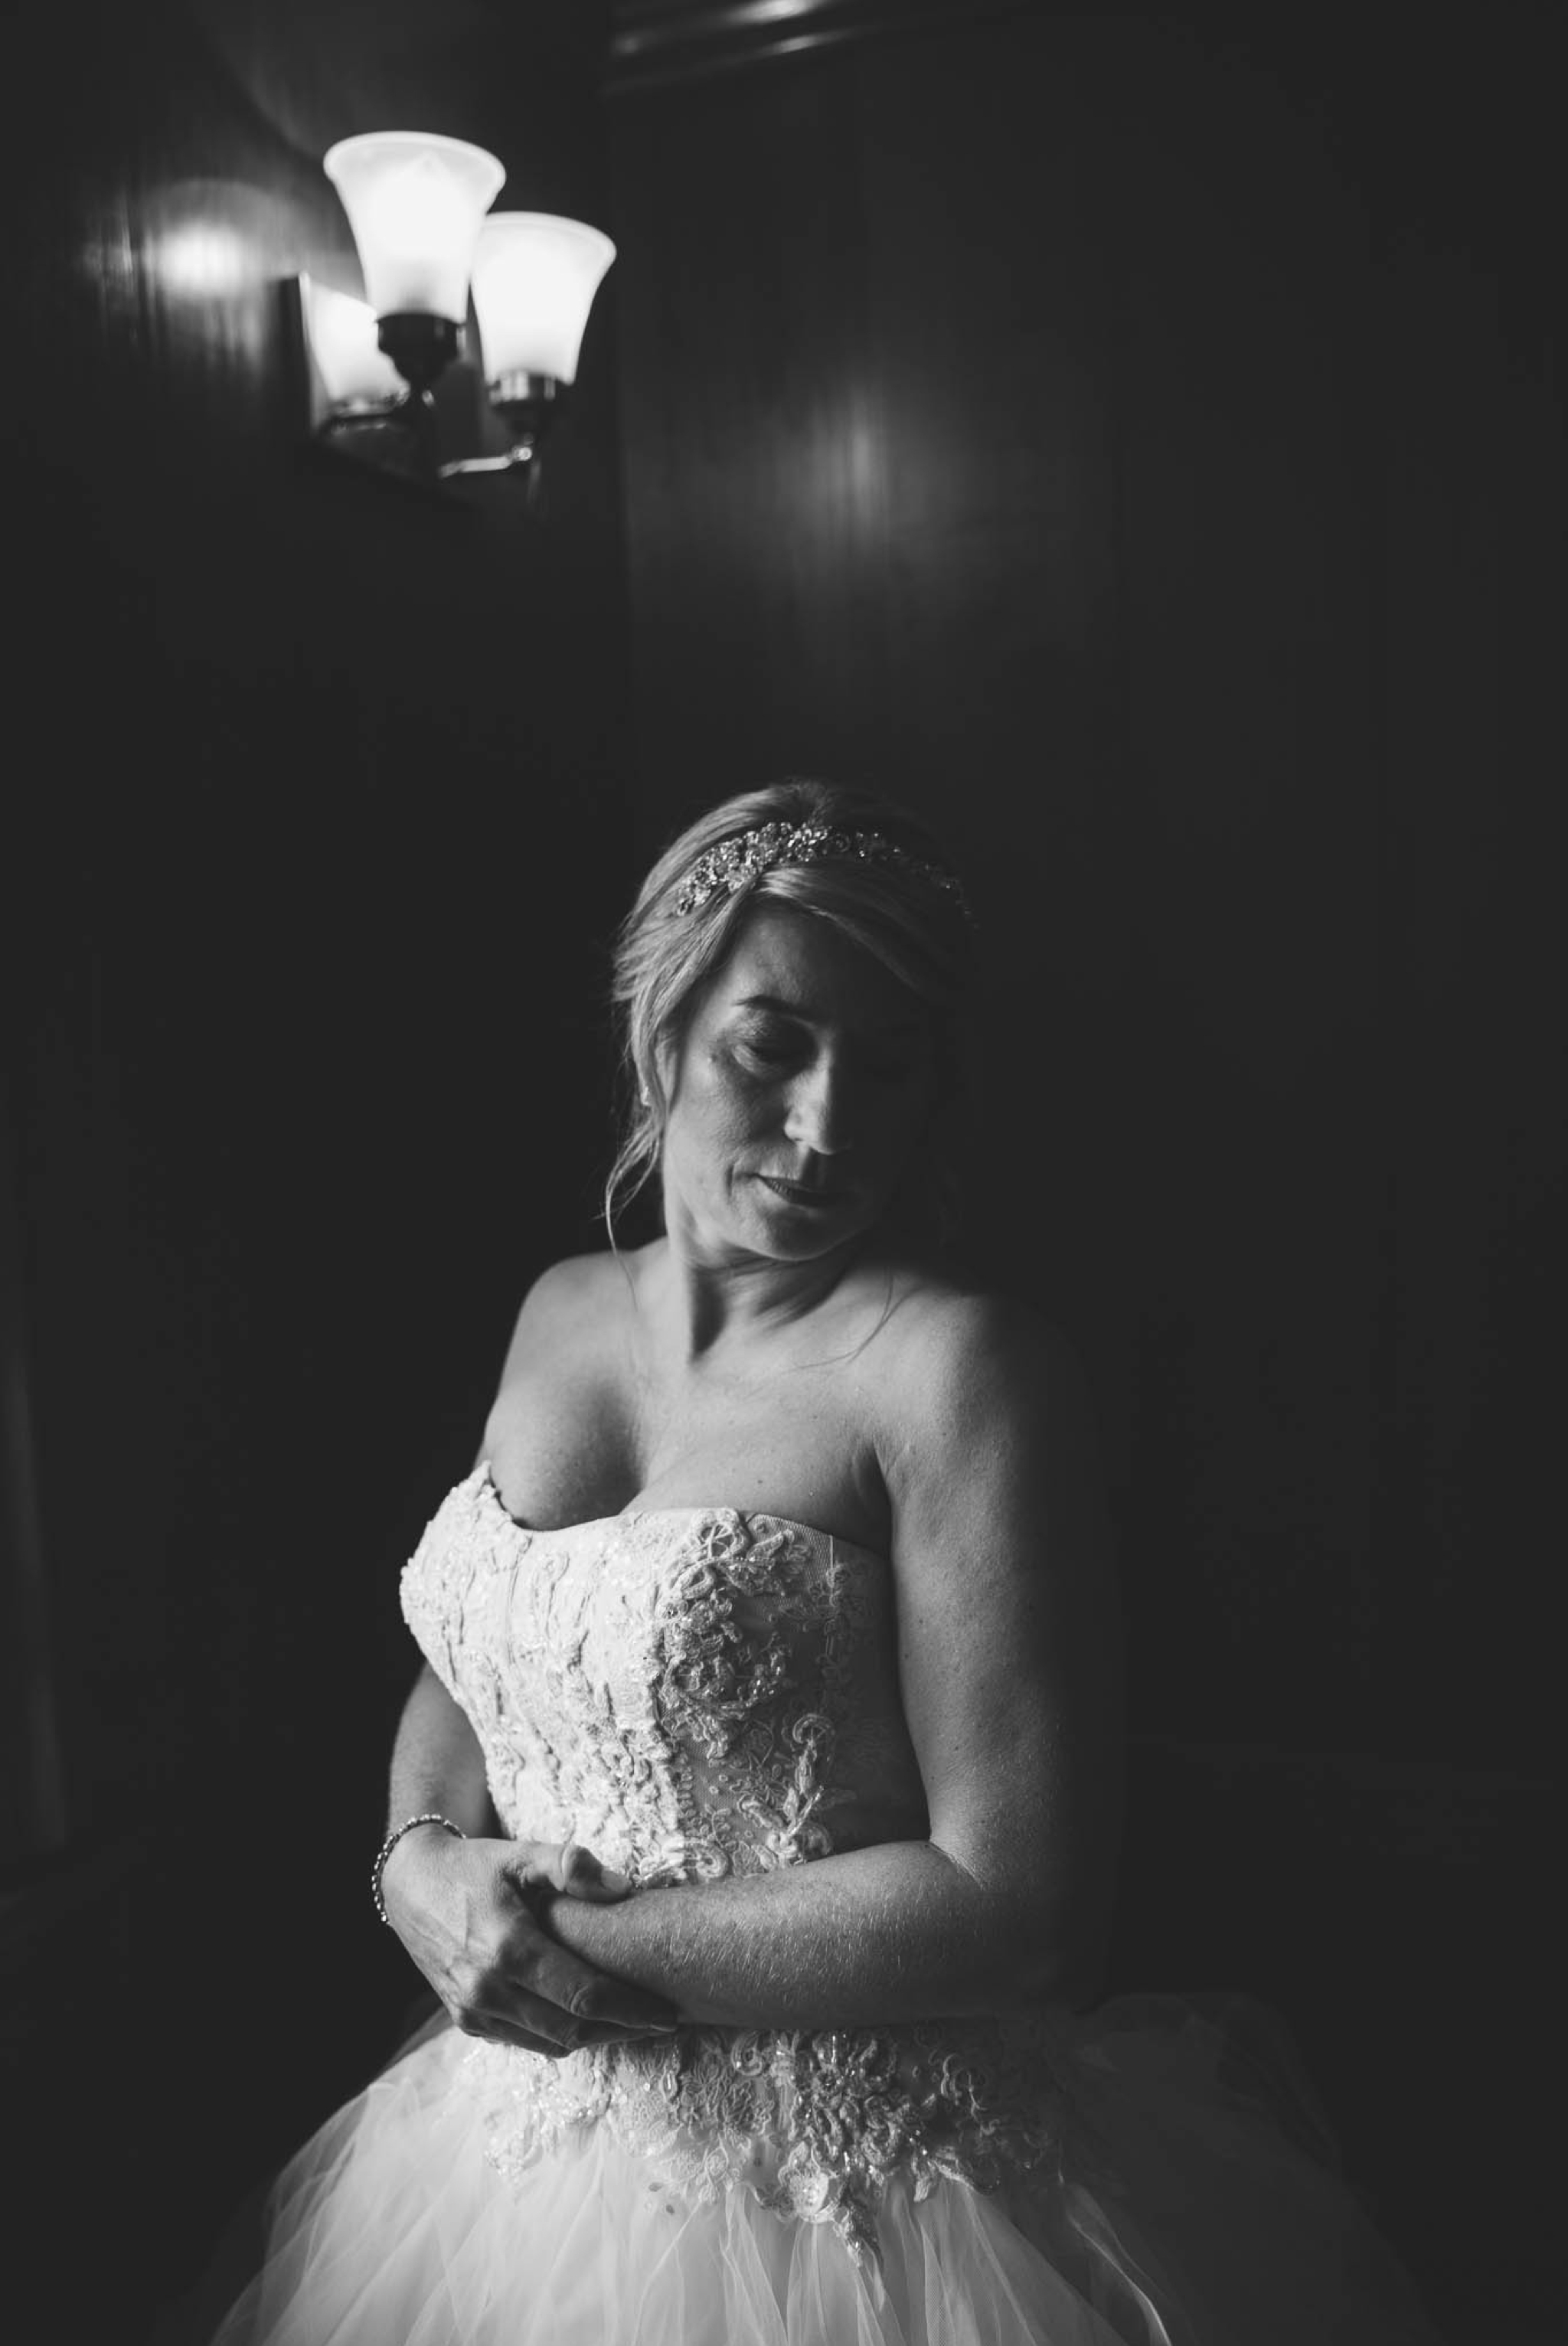 Bridal Portrait in black and white Dona + Doug - MacGregor Downs Country Club in Cary, NC - Raleigh Wedding Photographer